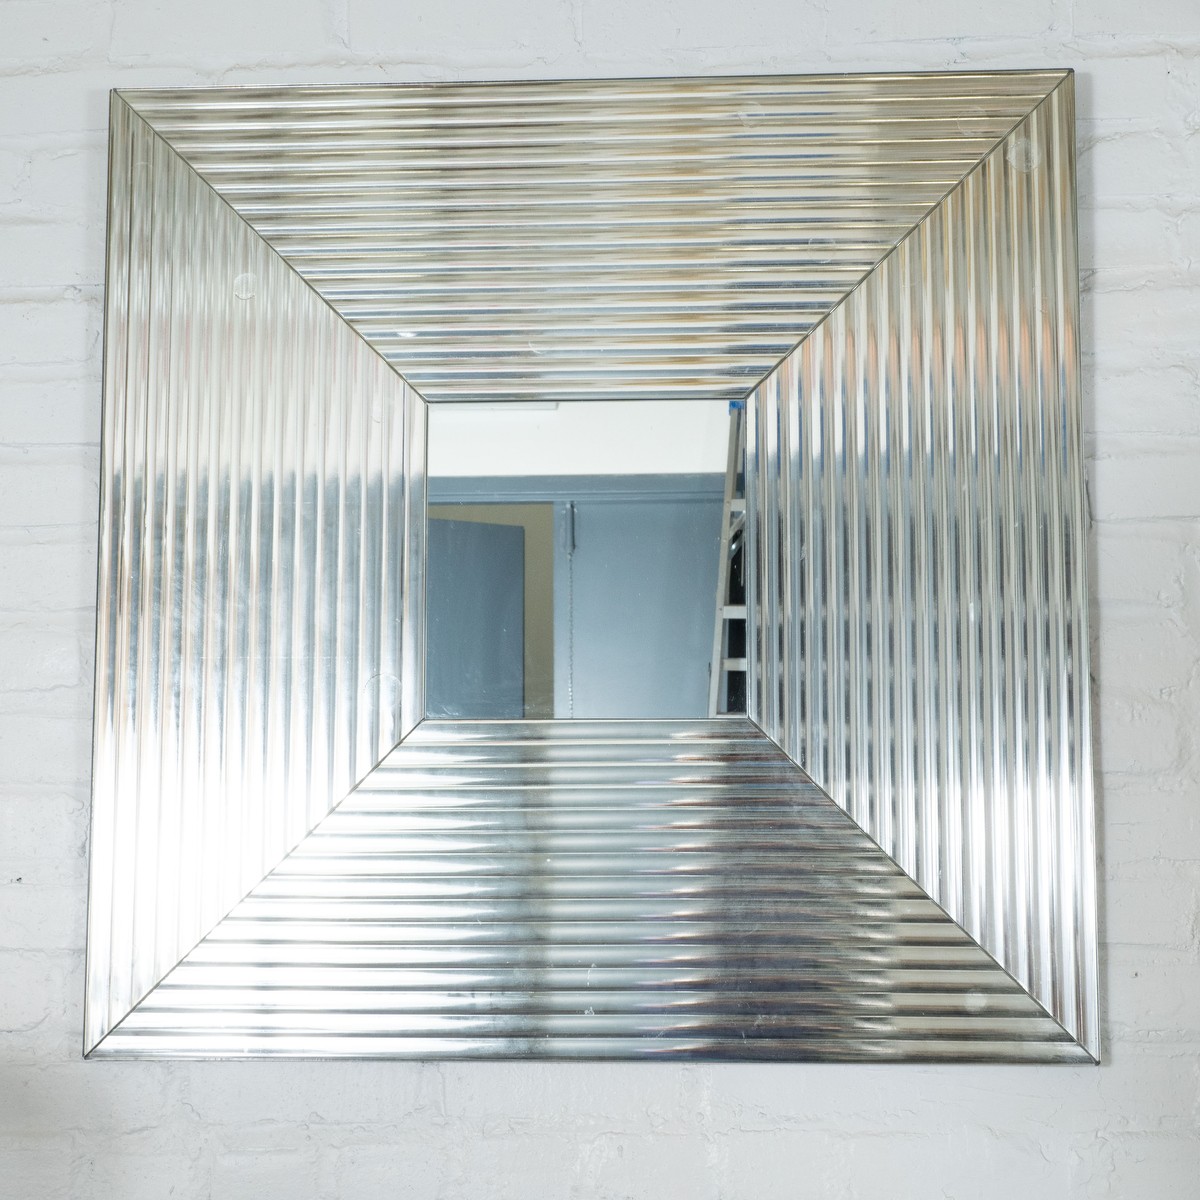 Fluted Architectural Mirror